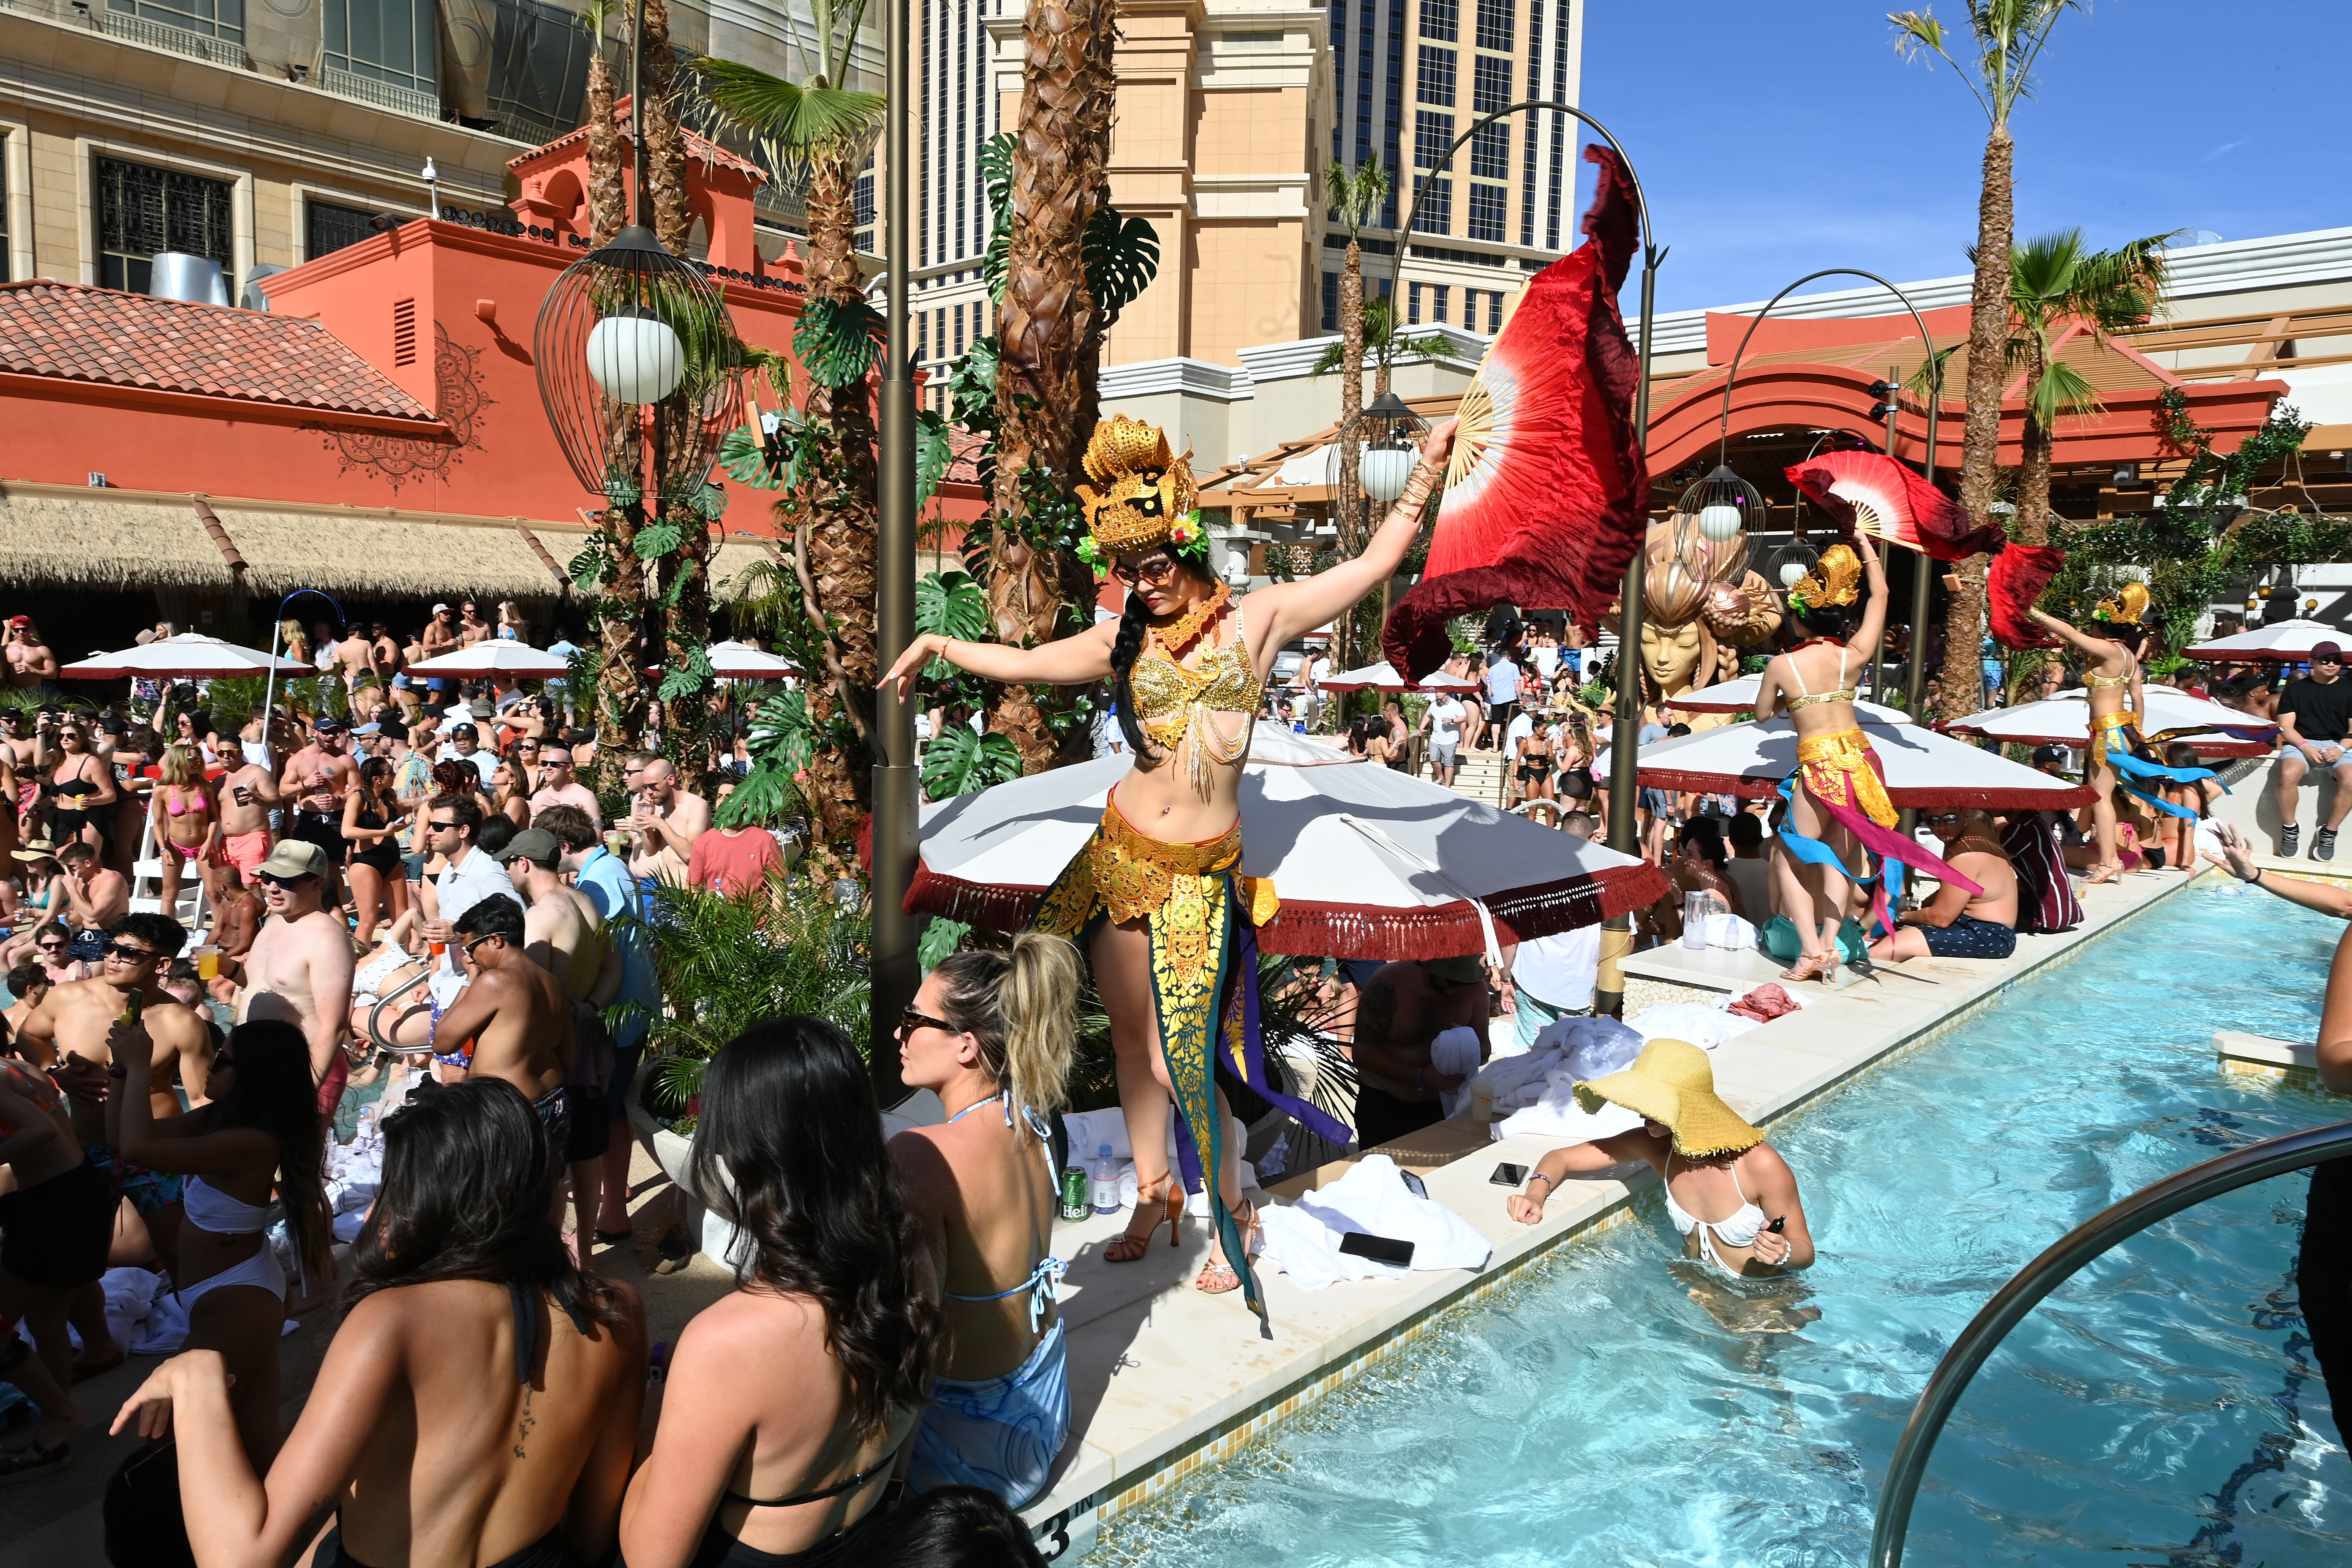 There is entertainment wherever you look in Las Vegas, especially at the Tao Beach Club